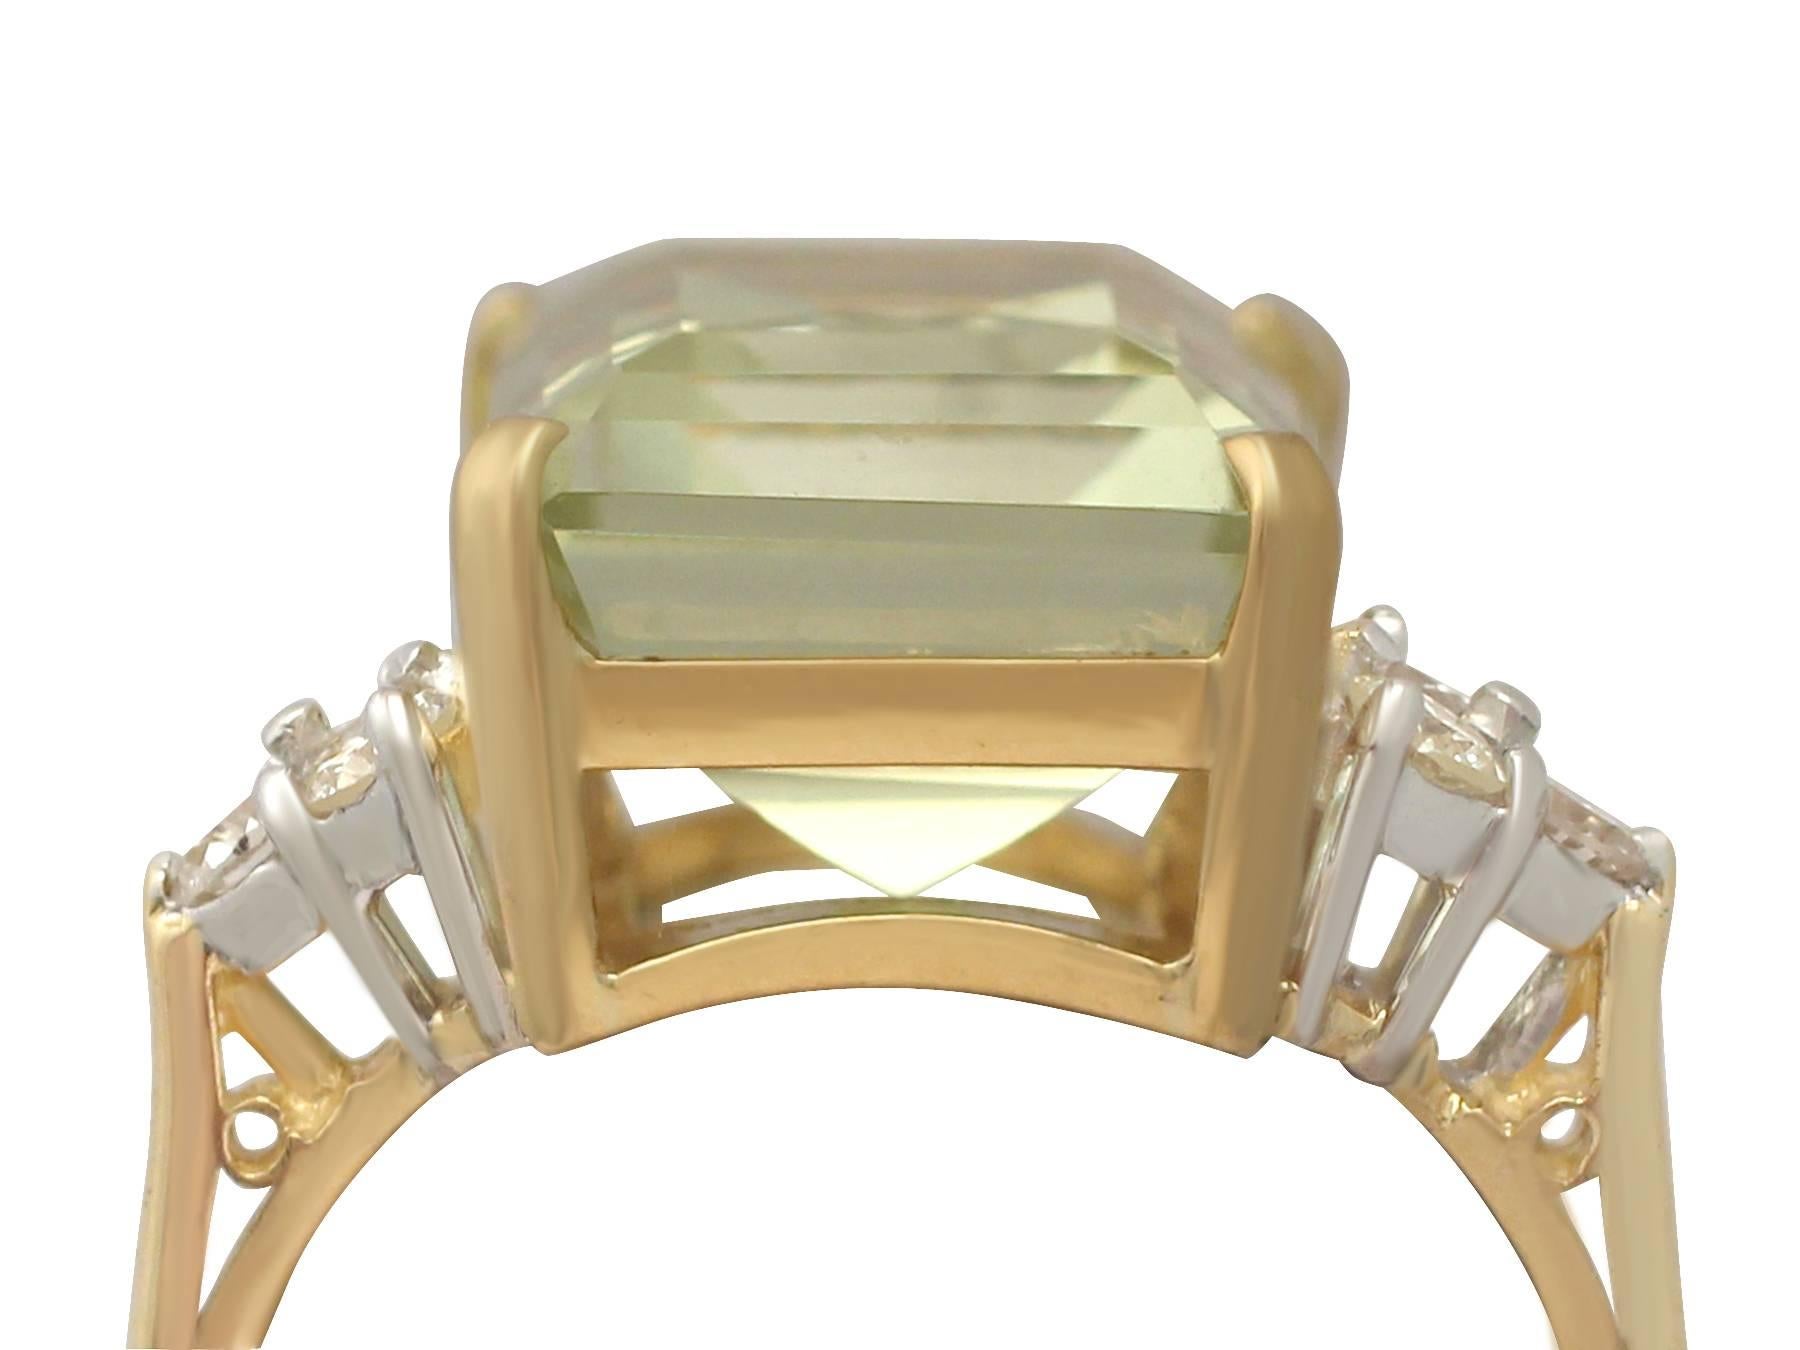 A fine and impressive vintage 7.84 carat citrine and 0.32 carat diamond, 18 karat yellow gold and 18 karat white gold set cocktail ring; part of our diverse gemstone jewellery and estate jewelry collections

This fine and impressive citrine and